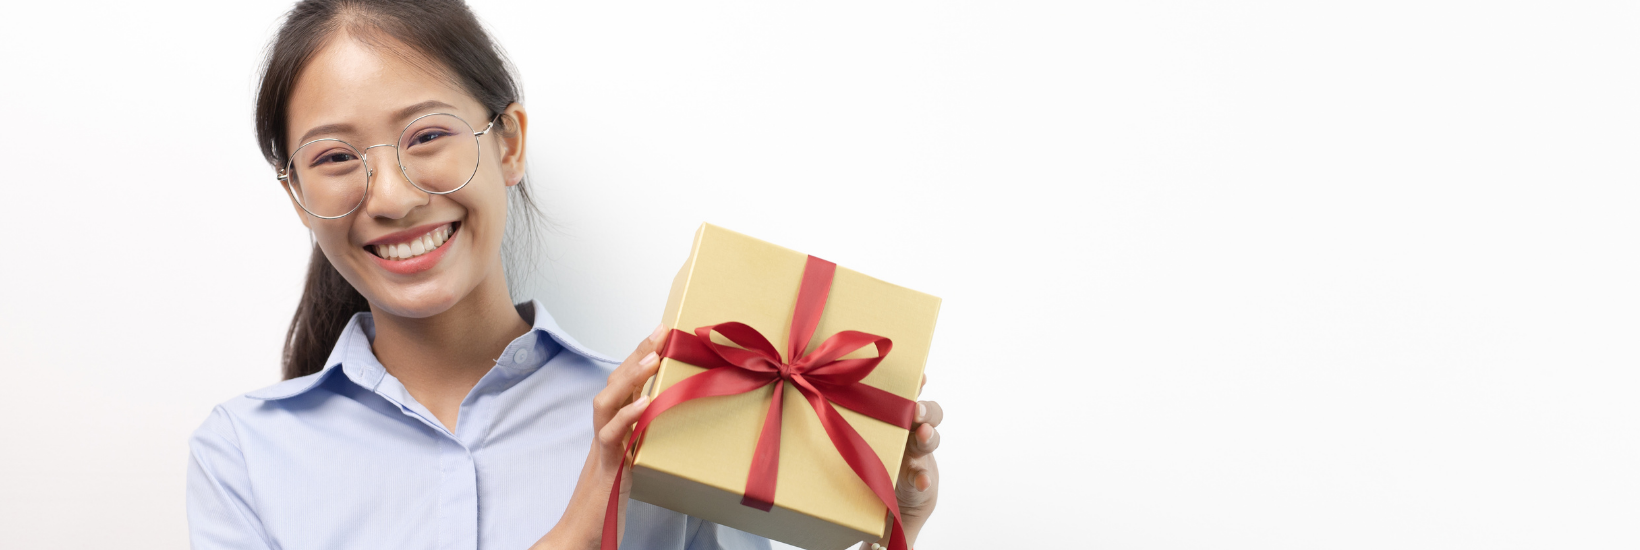 tradition of gift in the workplace